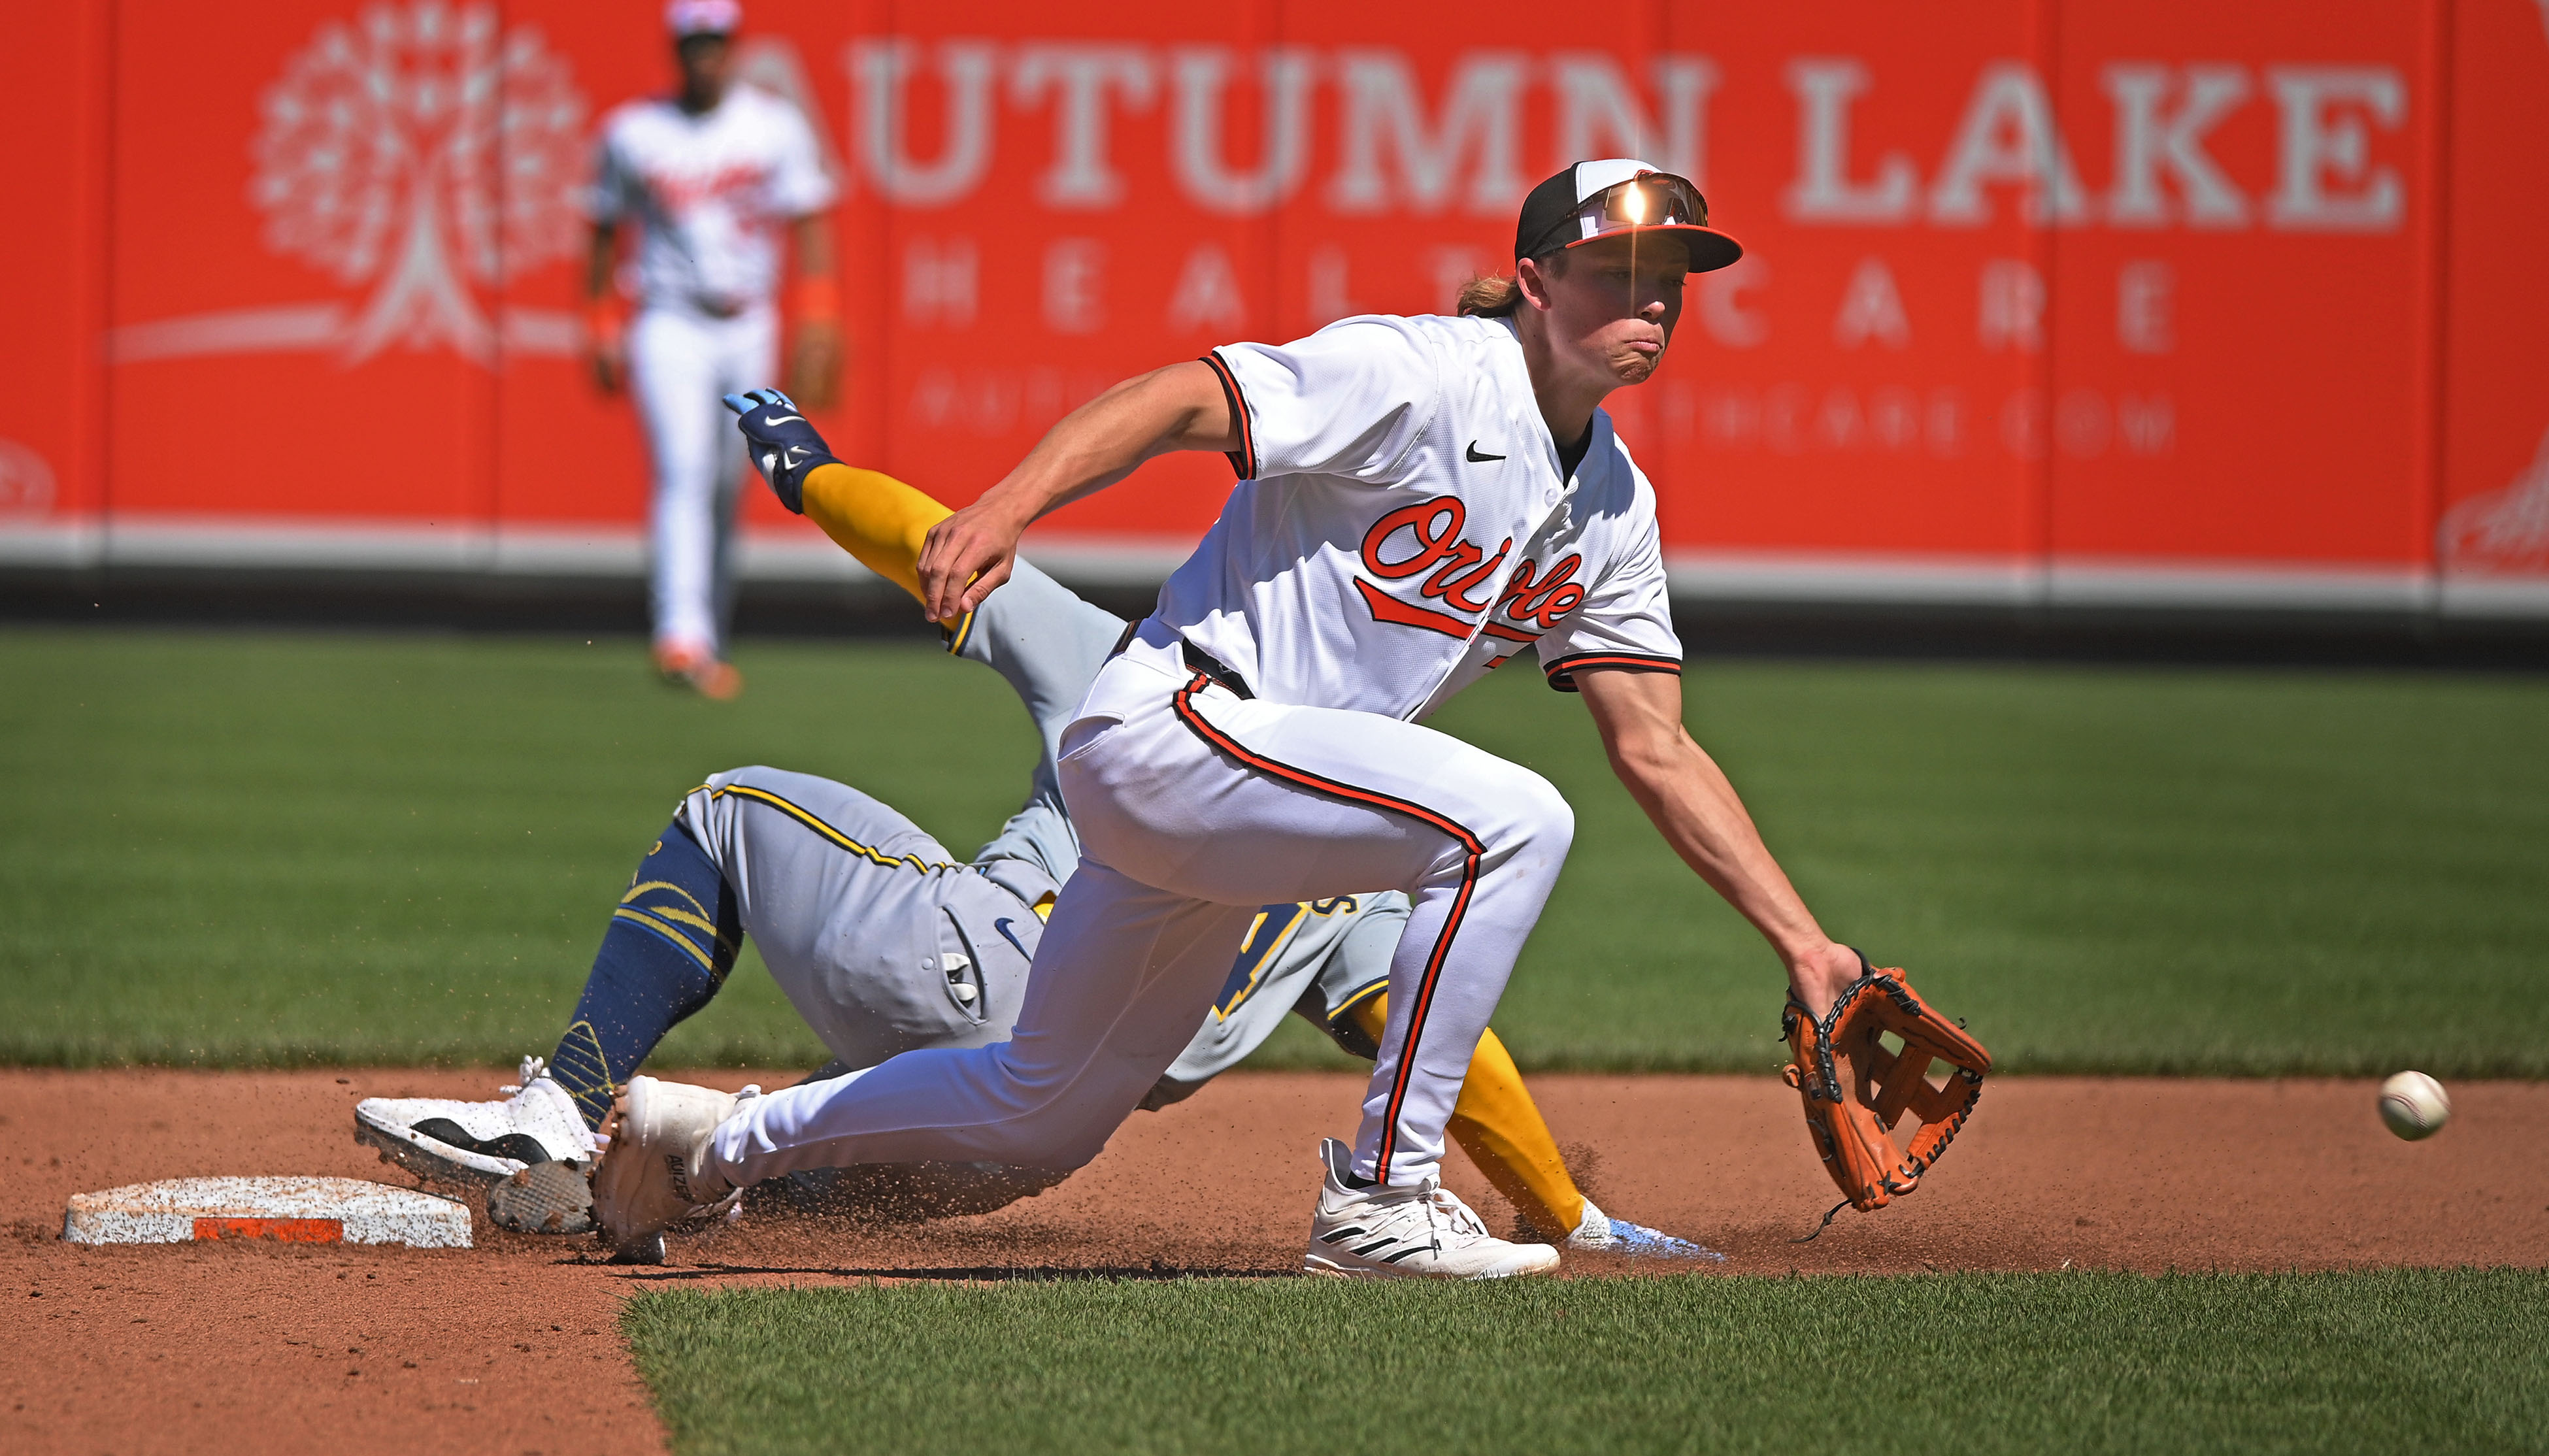 Brewers' William Contreras, left, steals second base as Orioles' Jackson Holliday awaits the throw in the fifth inning. The Orioles defeated the Brewers 6-4 at Oriole Park at Camden Yards. (Kenneth K. Lam/Staff)